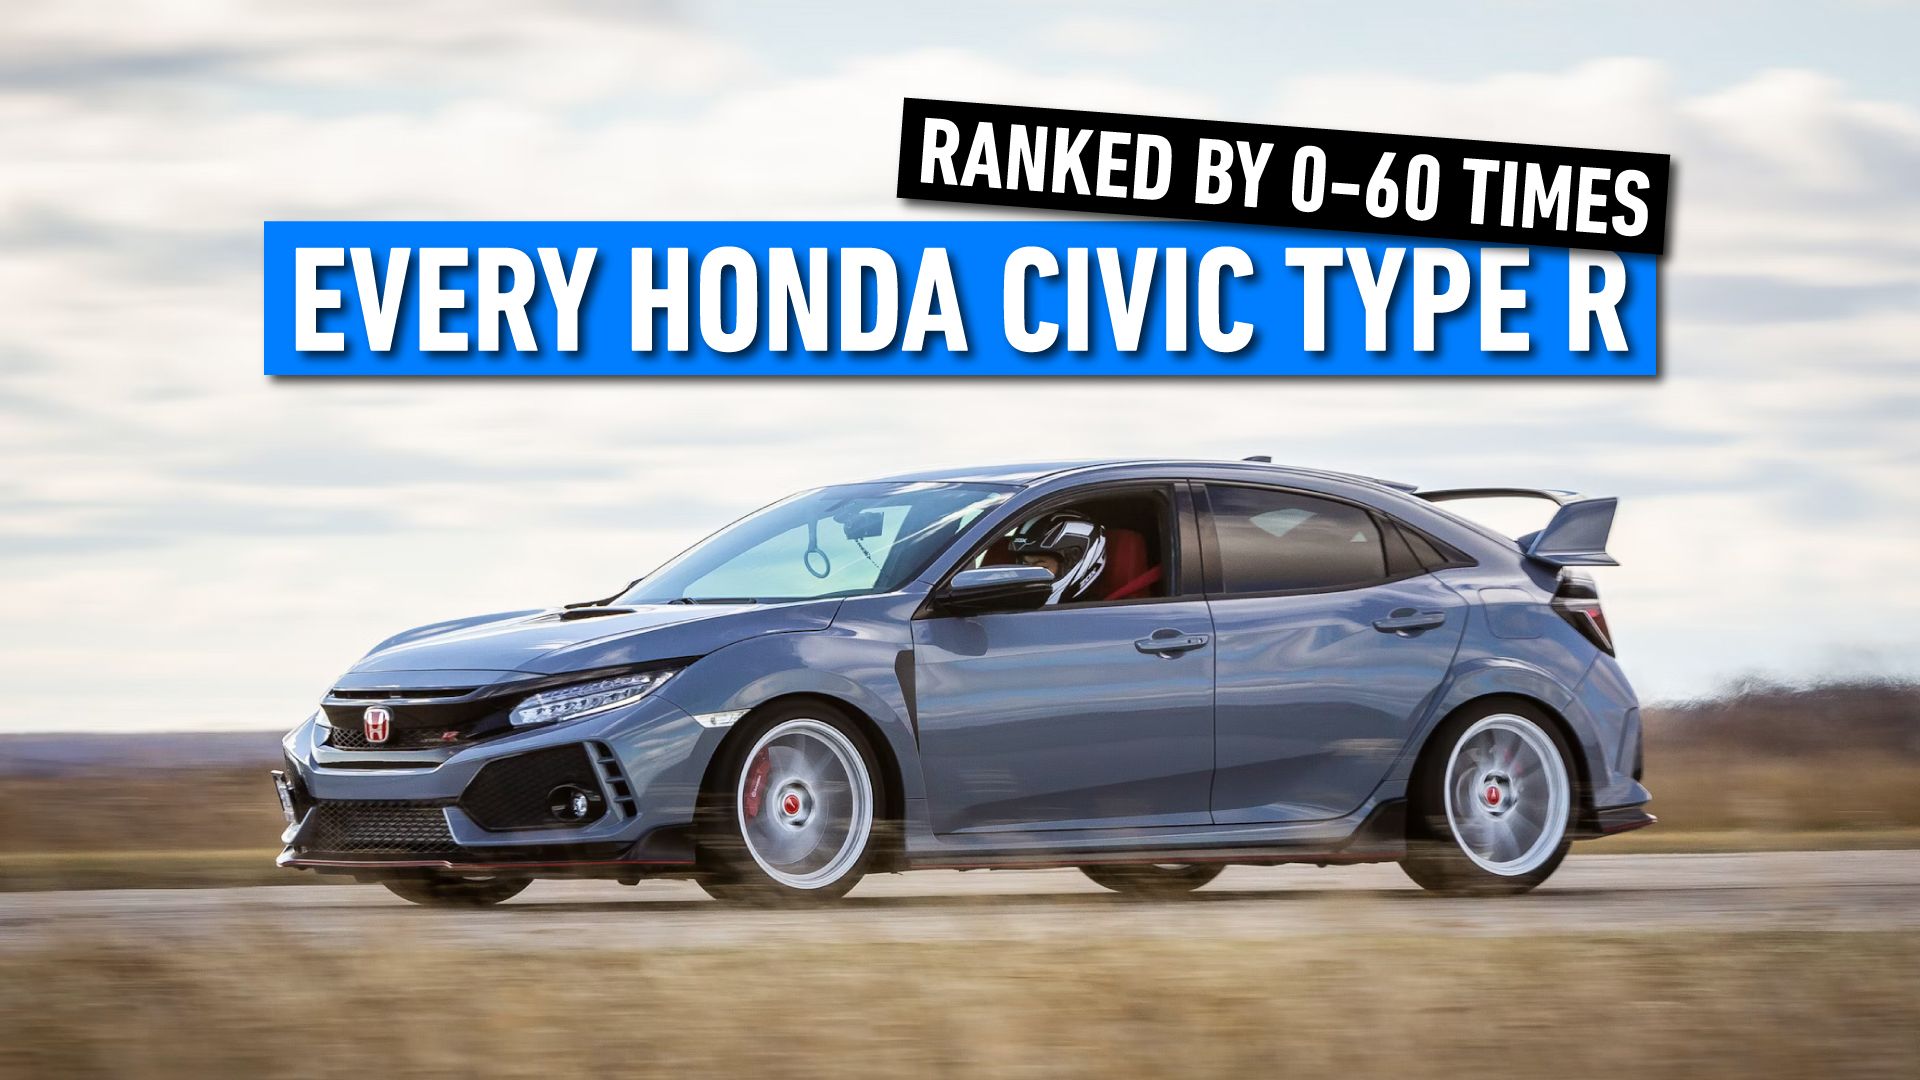 Every Honda Civic Type R Ranked By 0-60 MPH Times